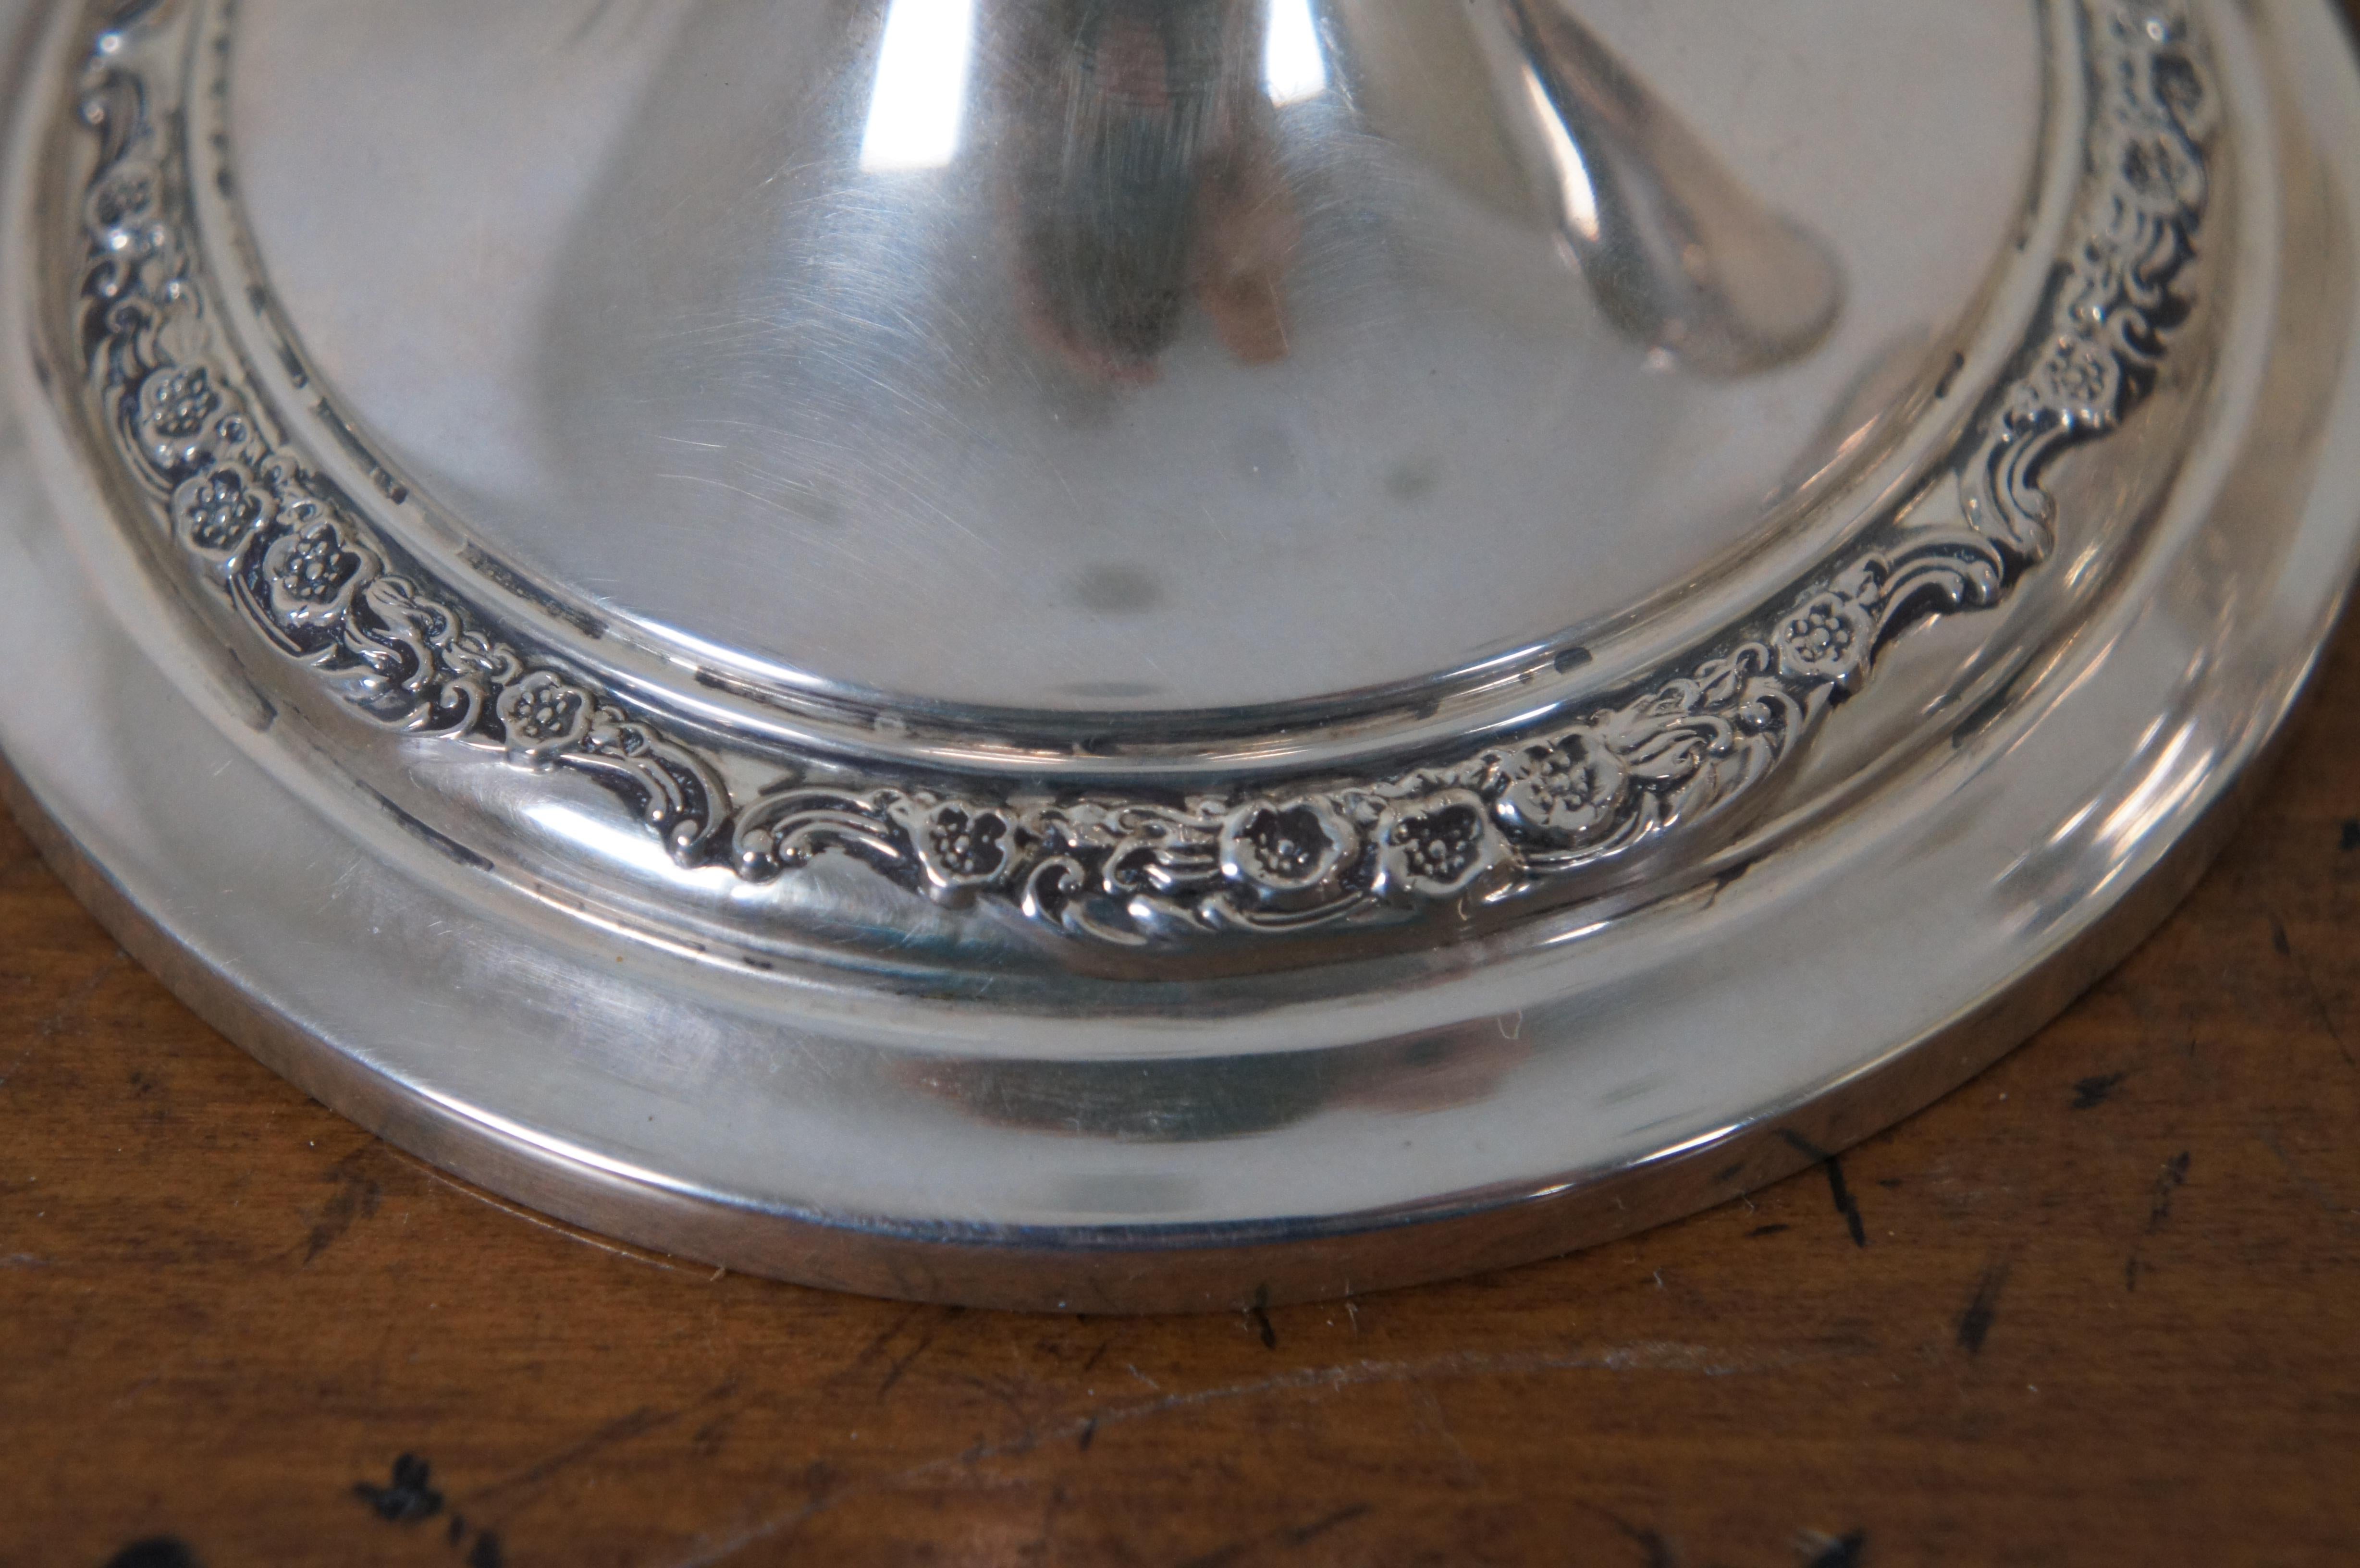 gorham sterling silver candle holders